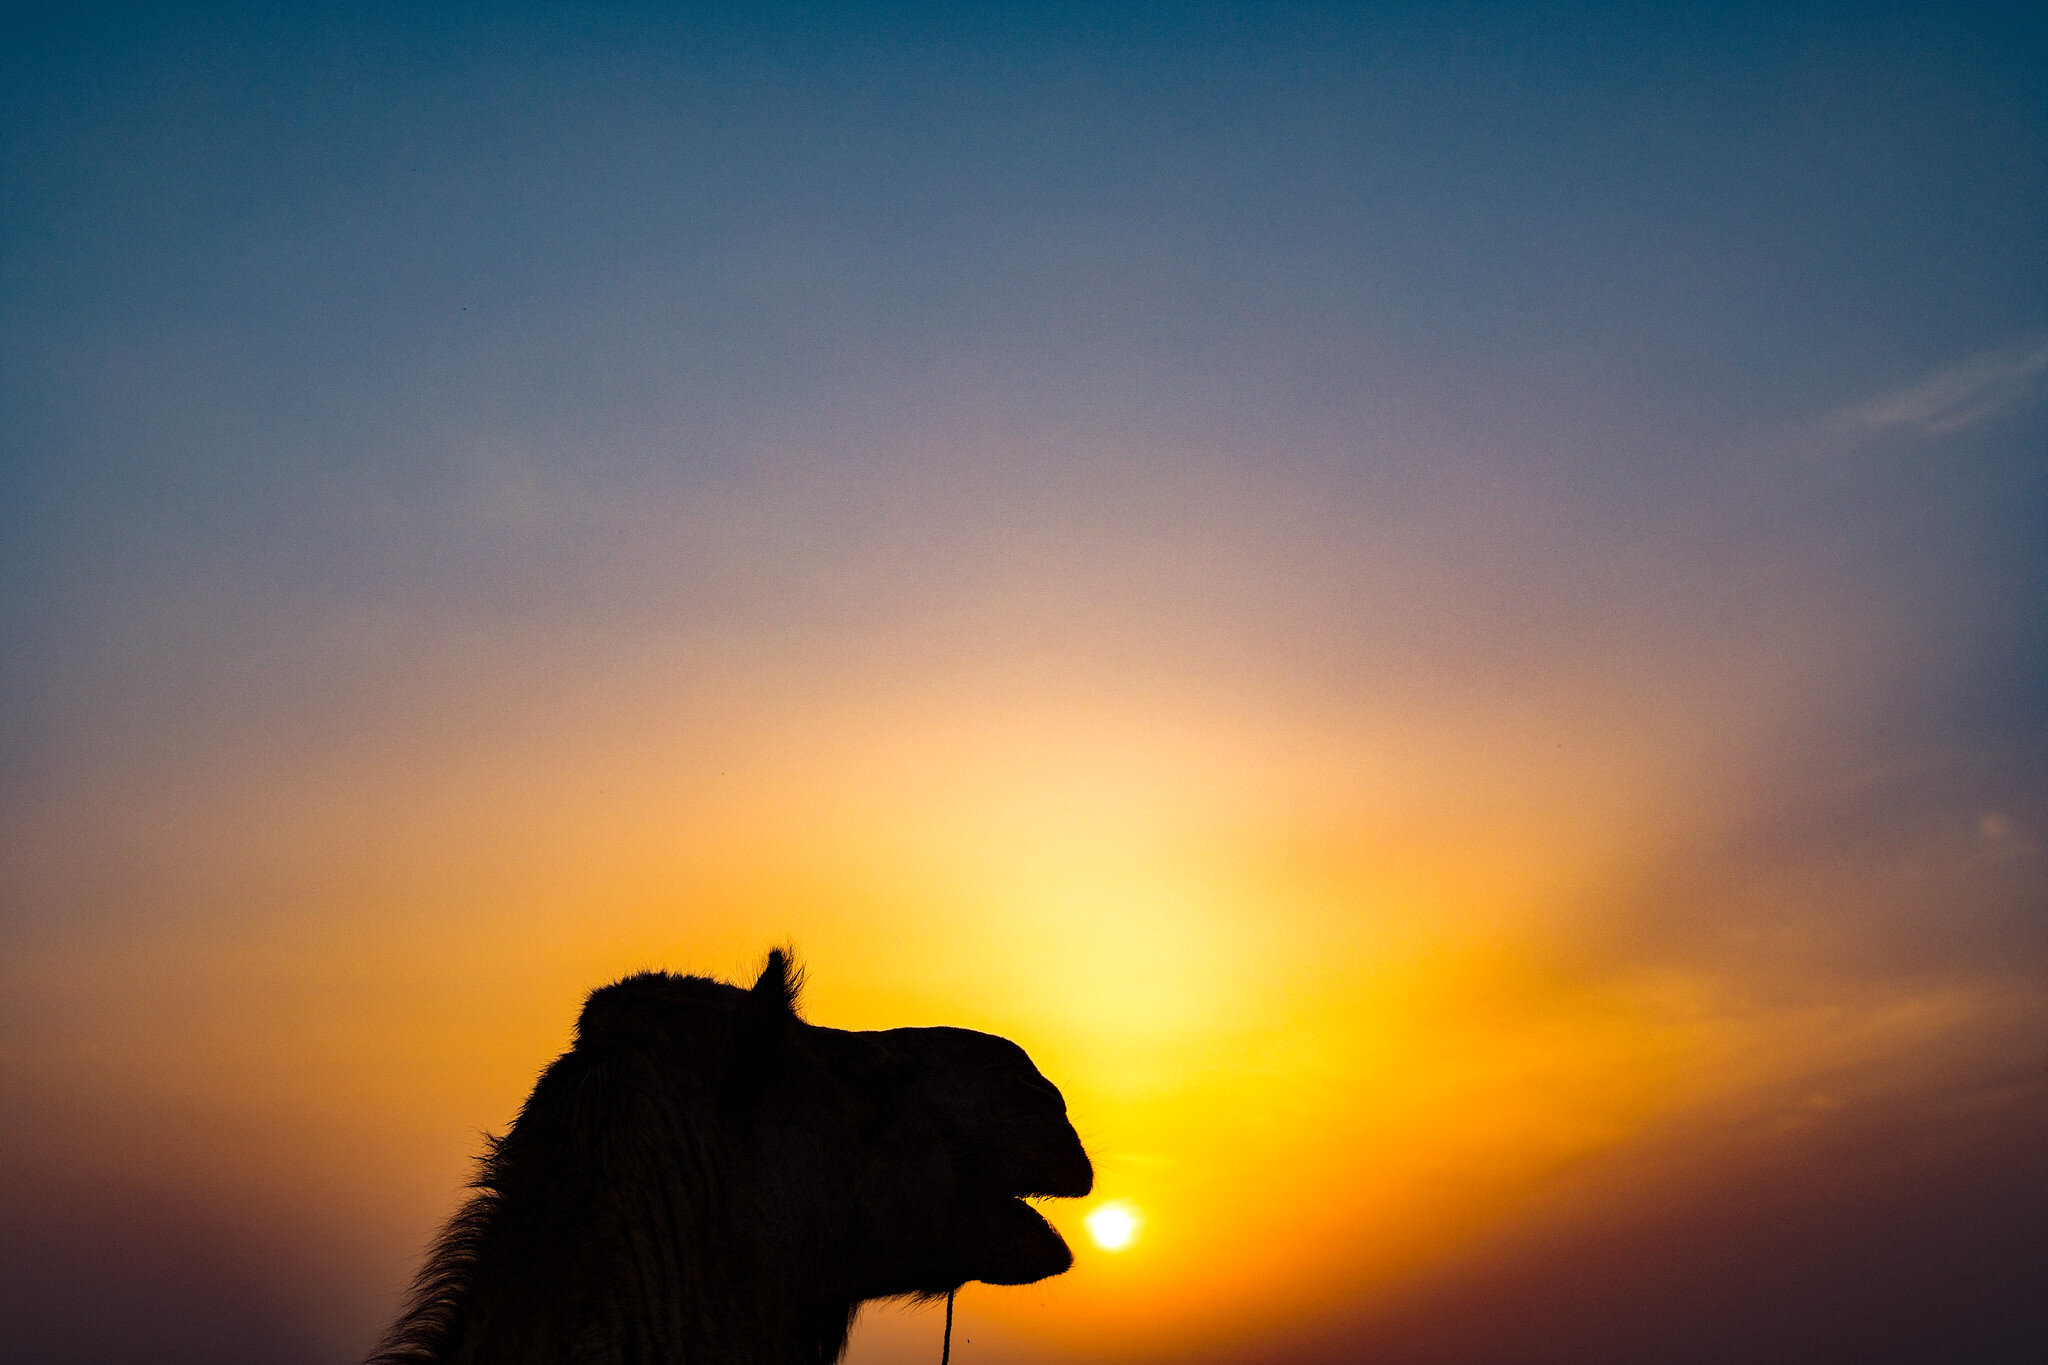 A silhouette portrait of a camel in the Thar Desert, India.